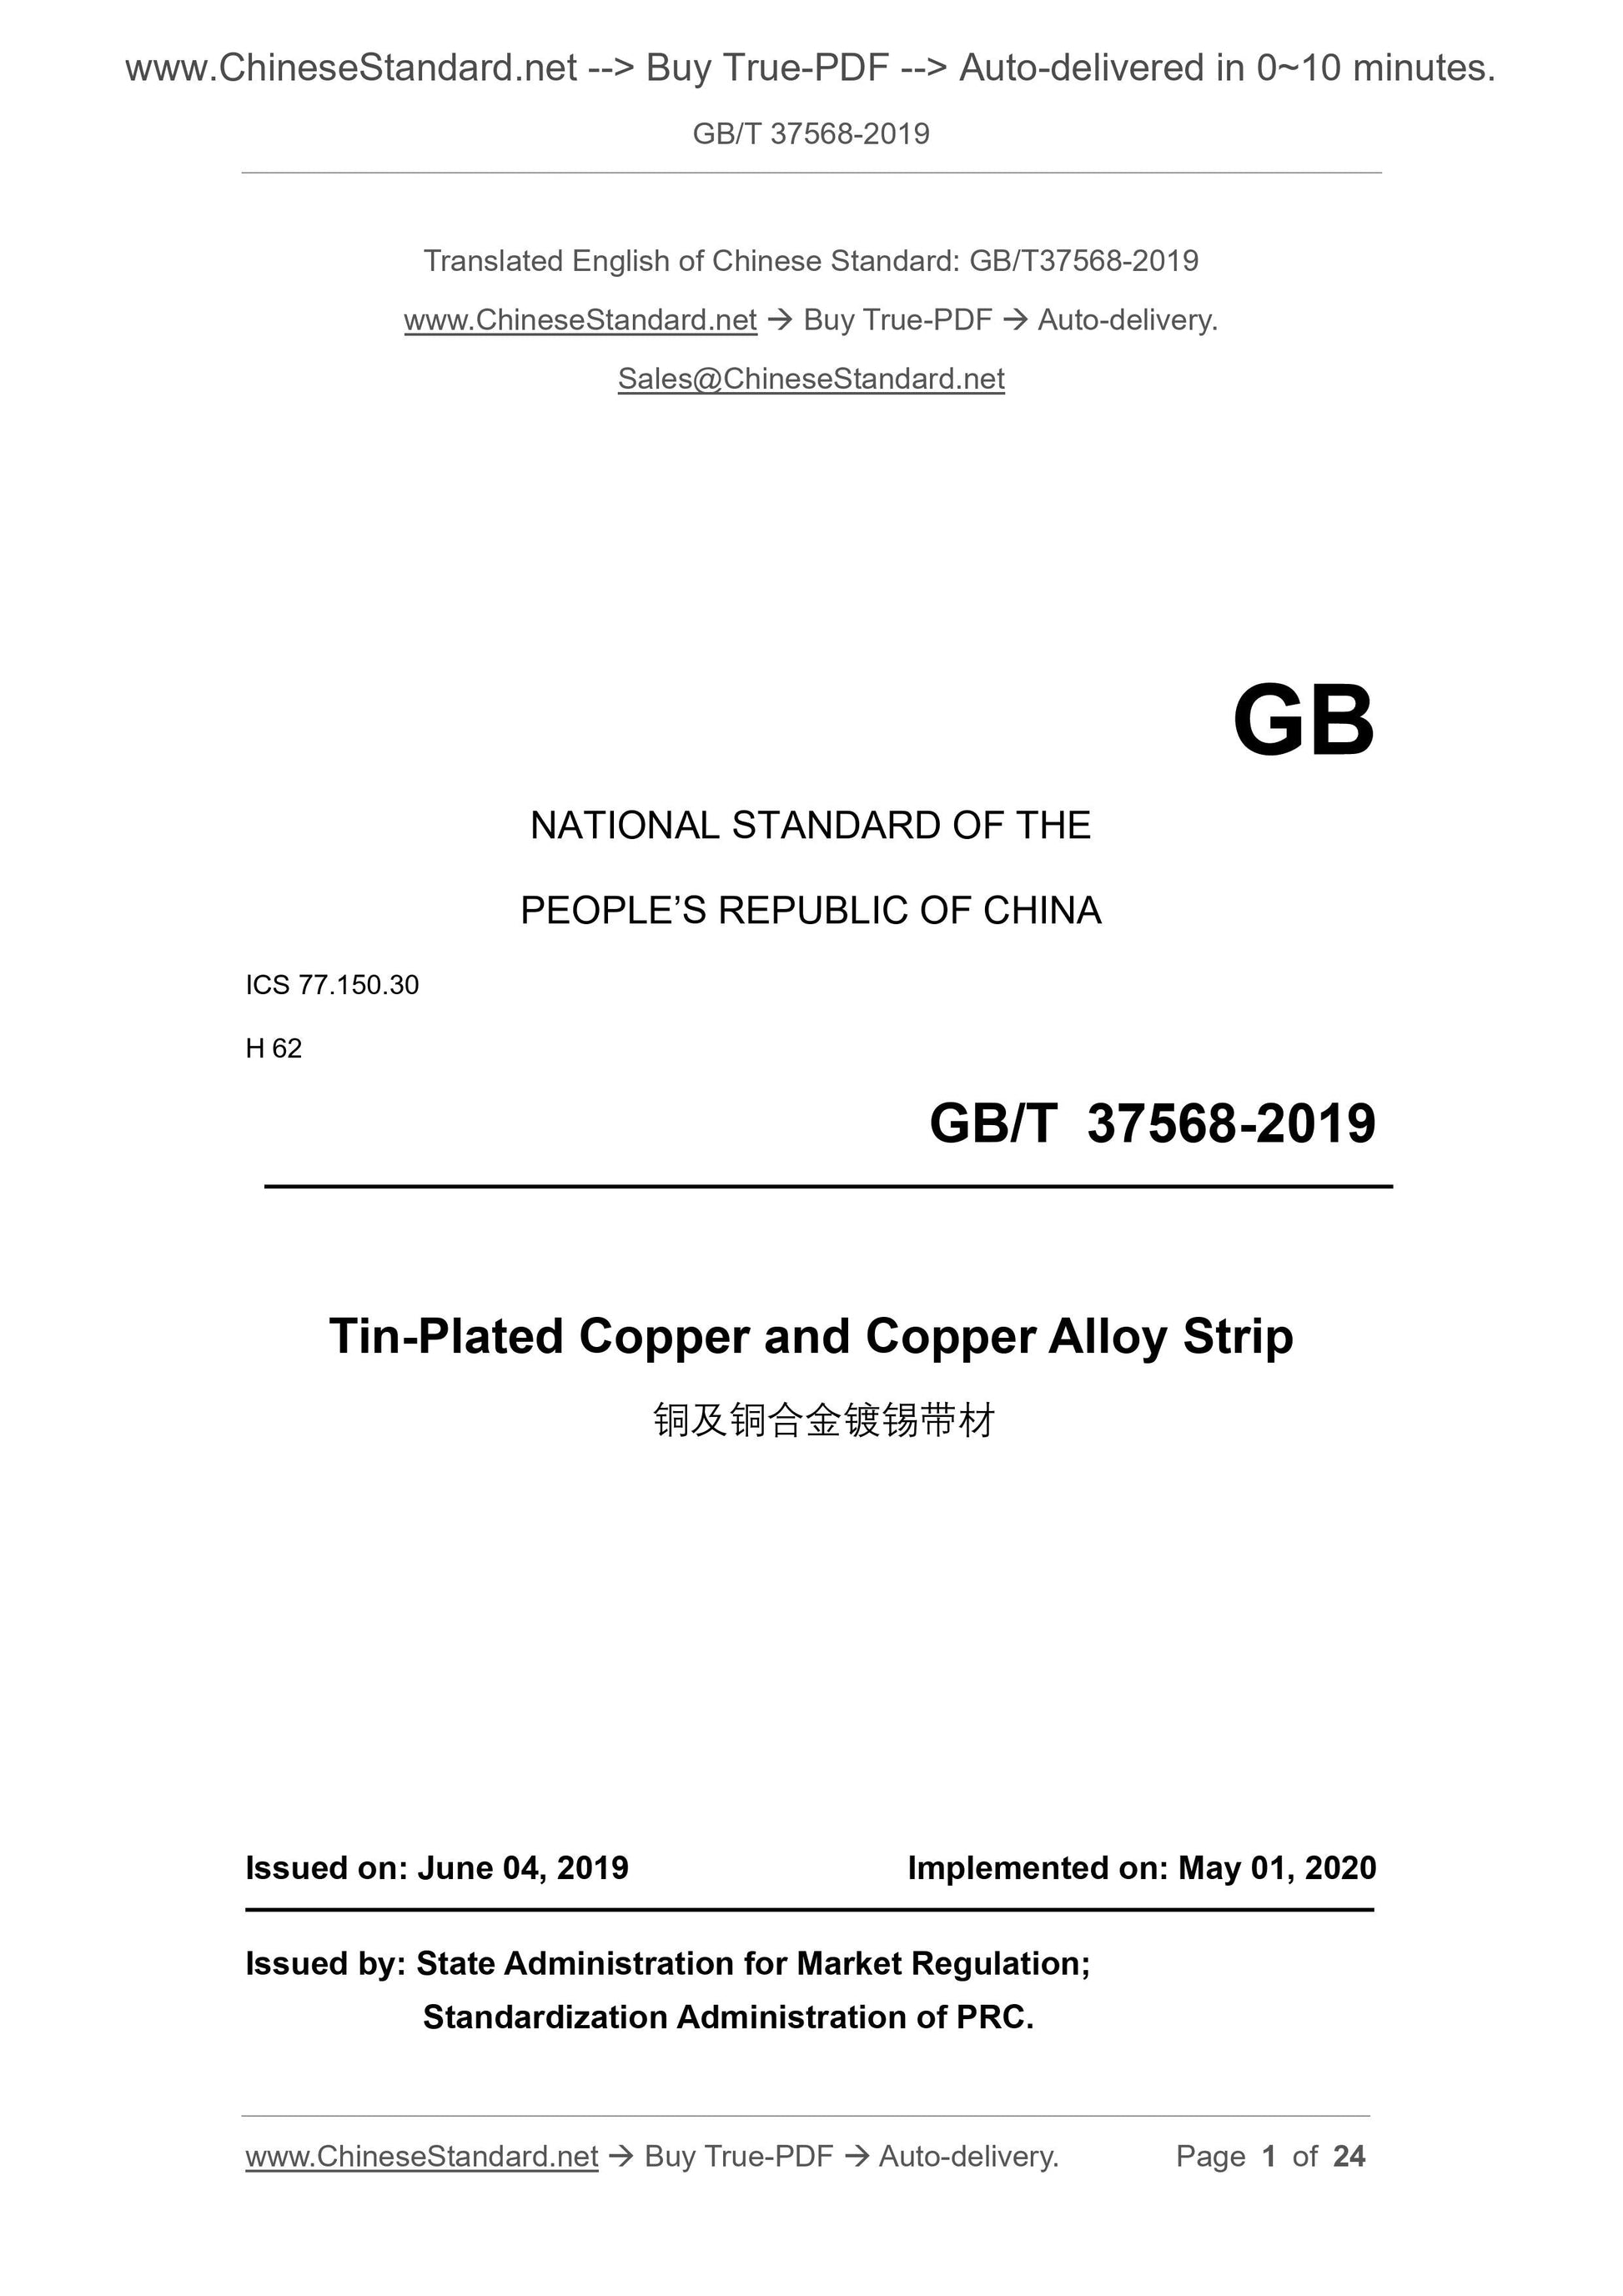 GB/T 37568-2019 Page 1